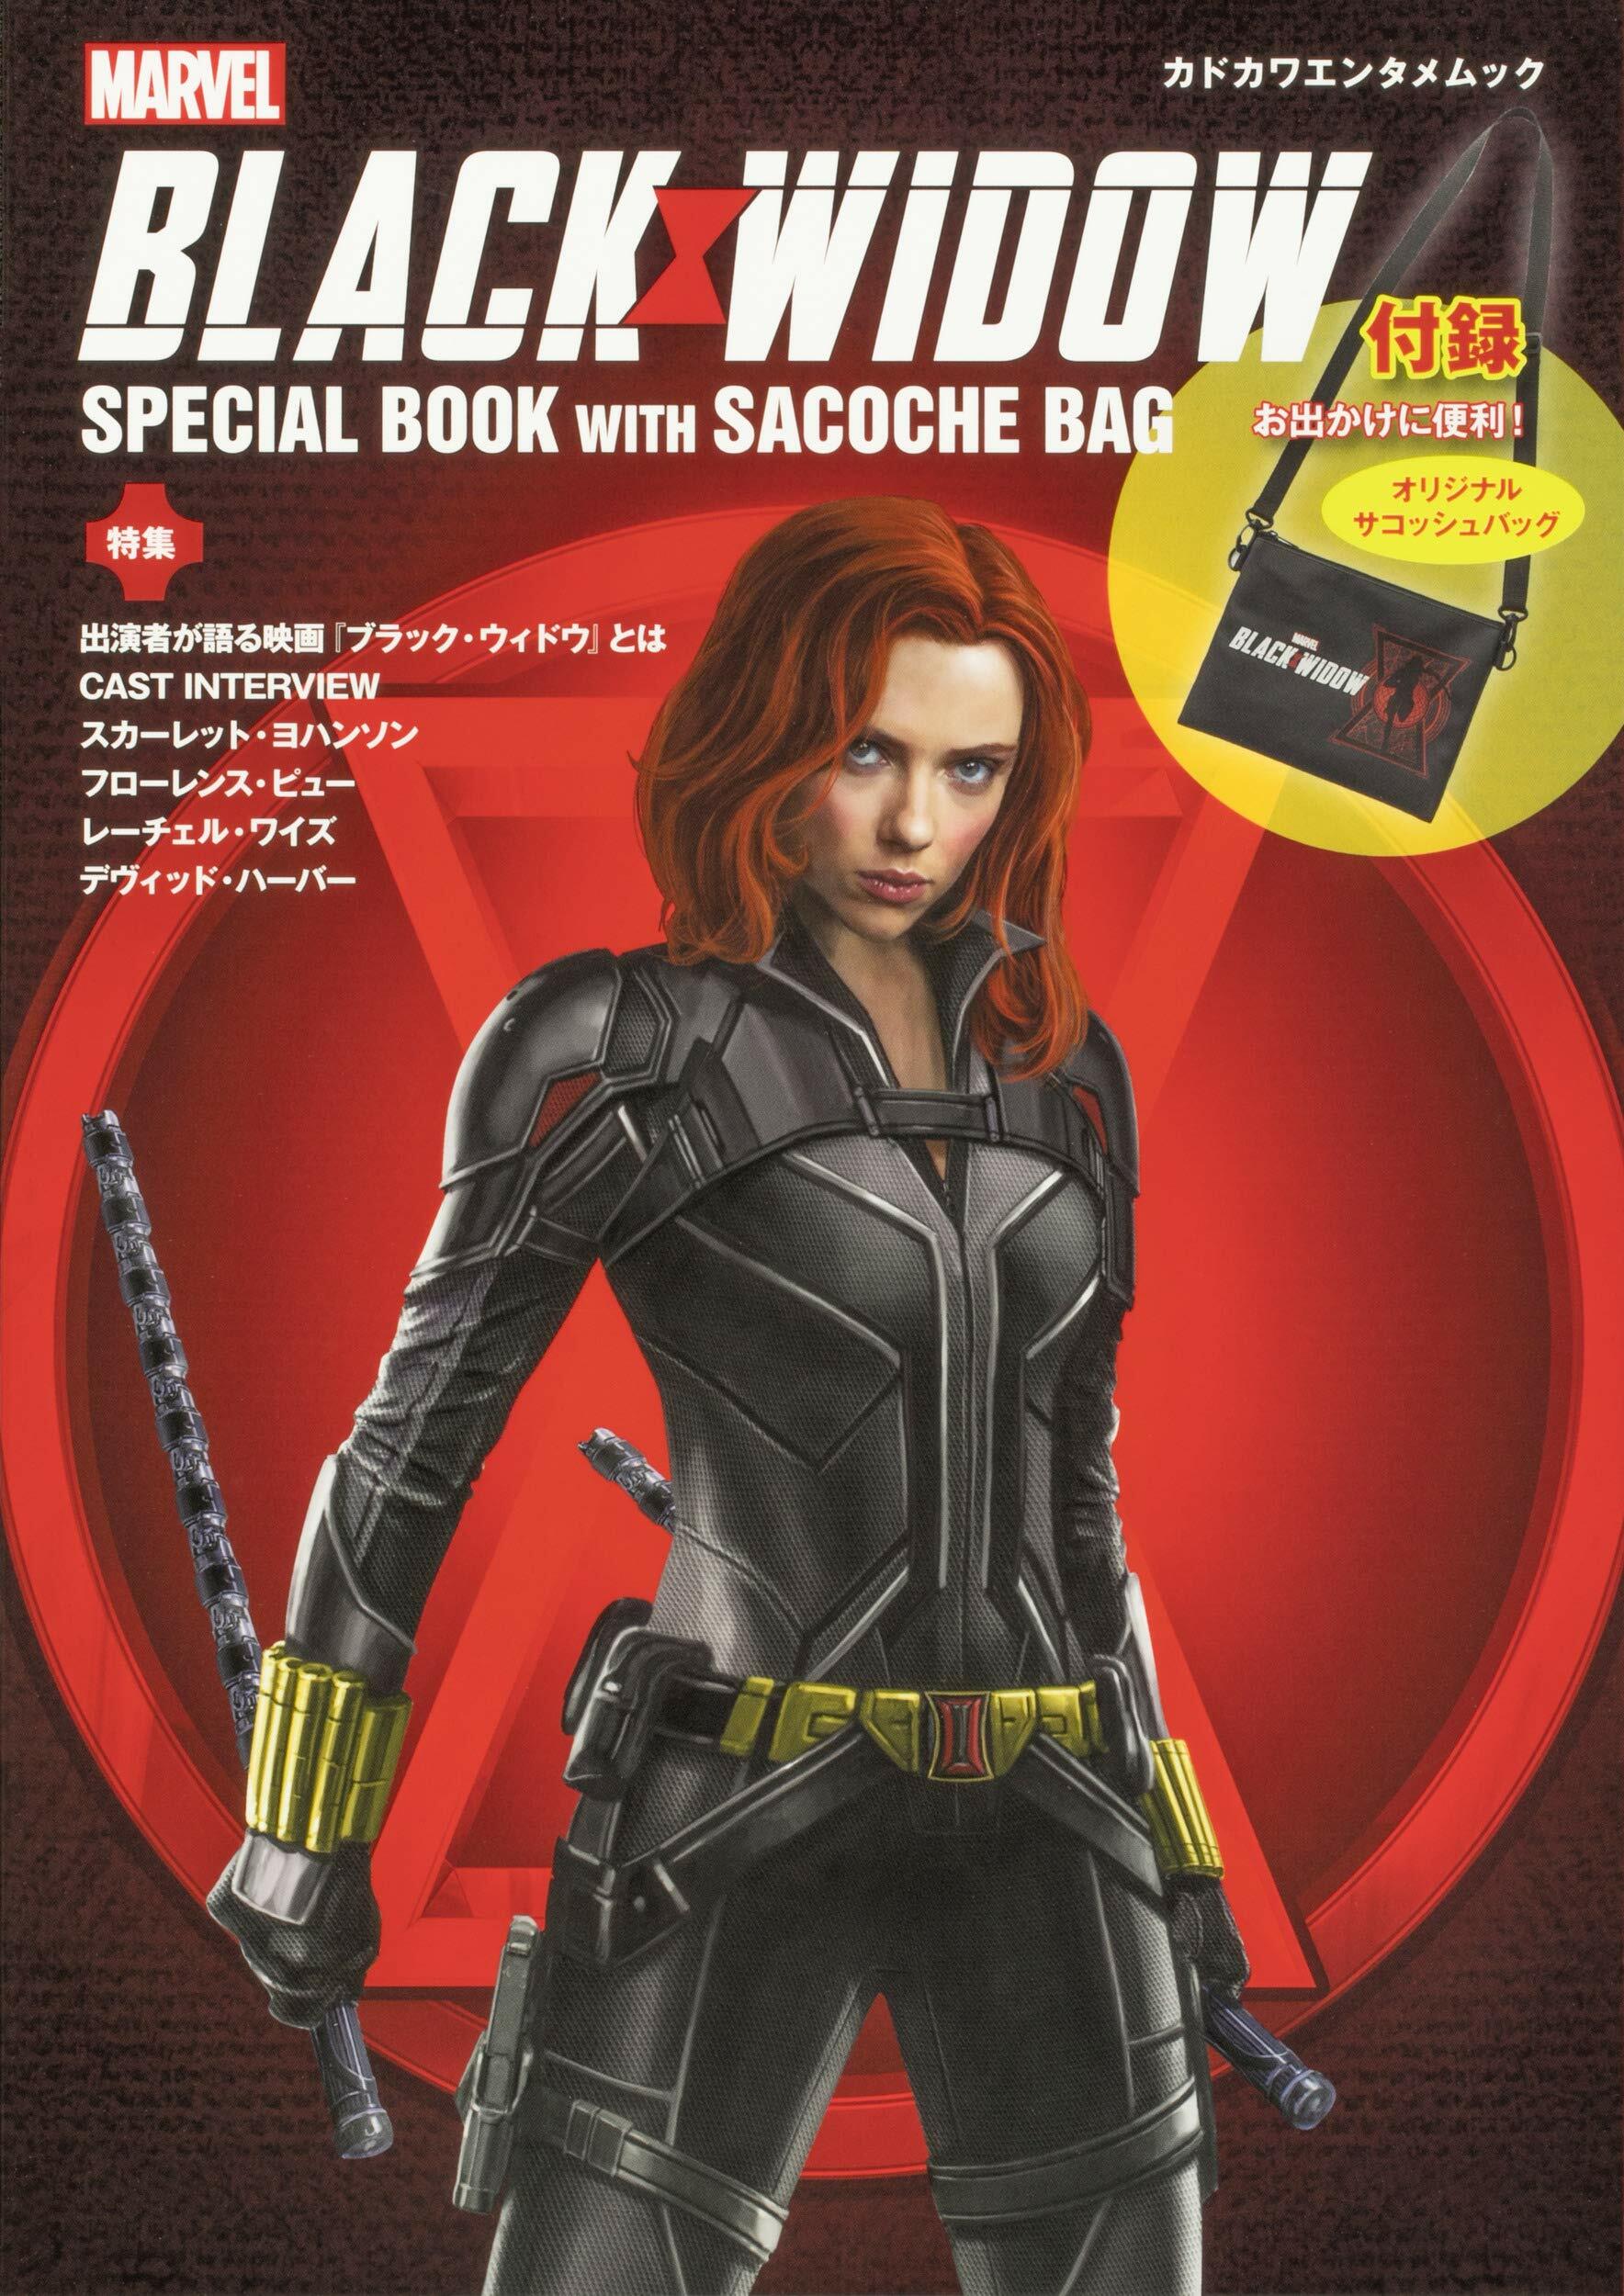 BLACK WIDOW SPECIAL BOOK WITH SACOCHE BAG (カドカワエンタメムック)